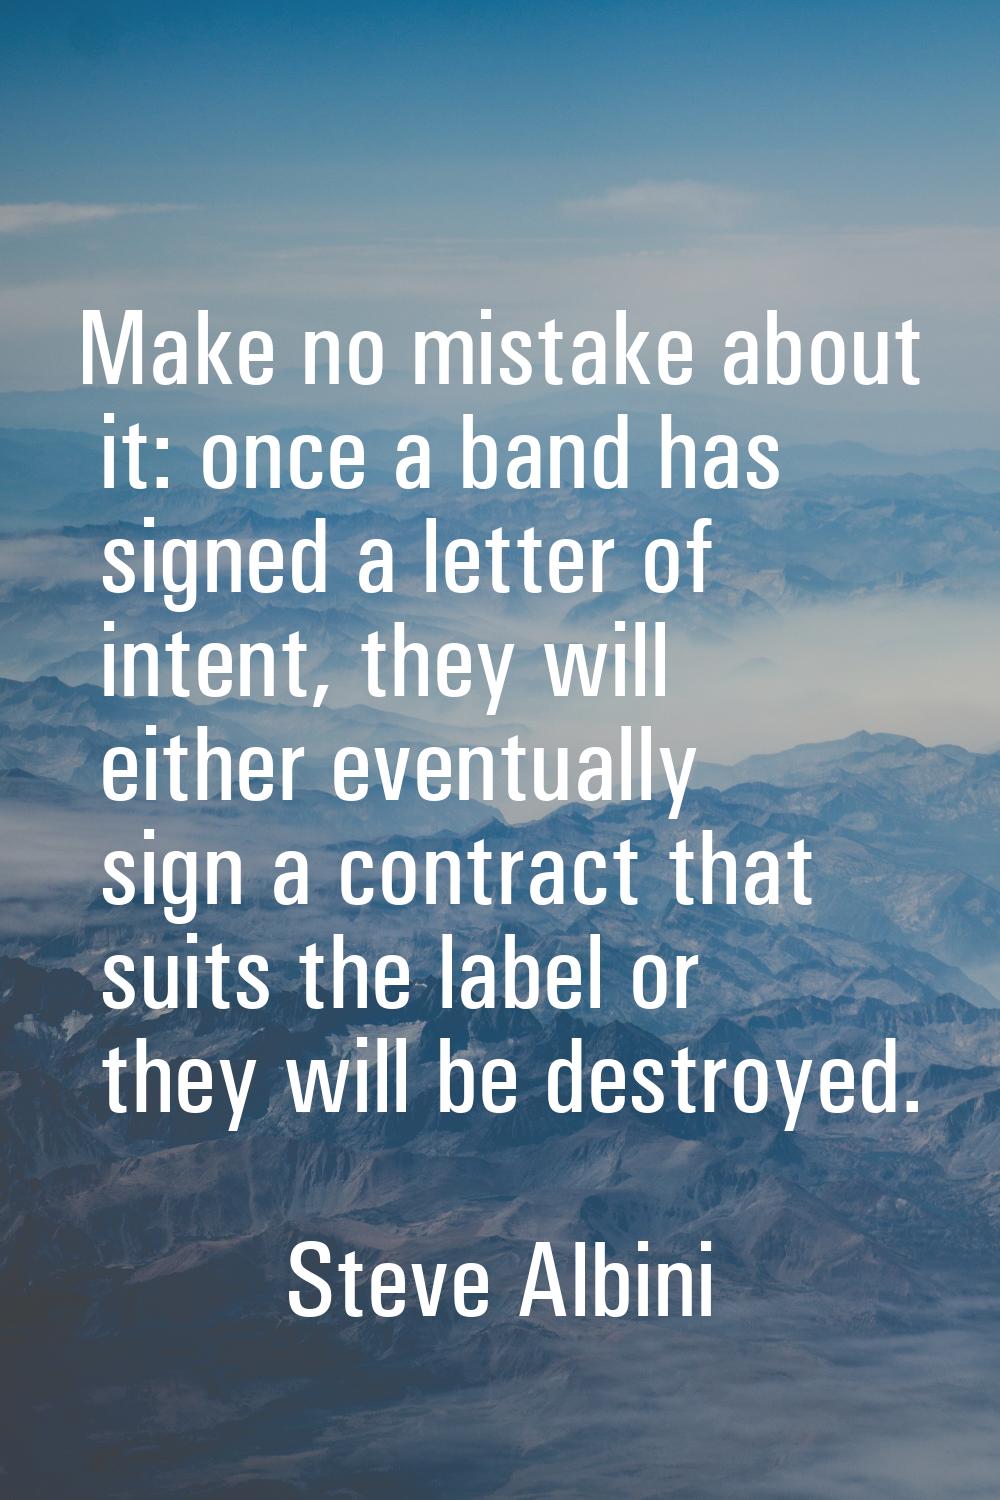 Make no mistake about it: once a band has signed a letter of intent, they will either eventually si